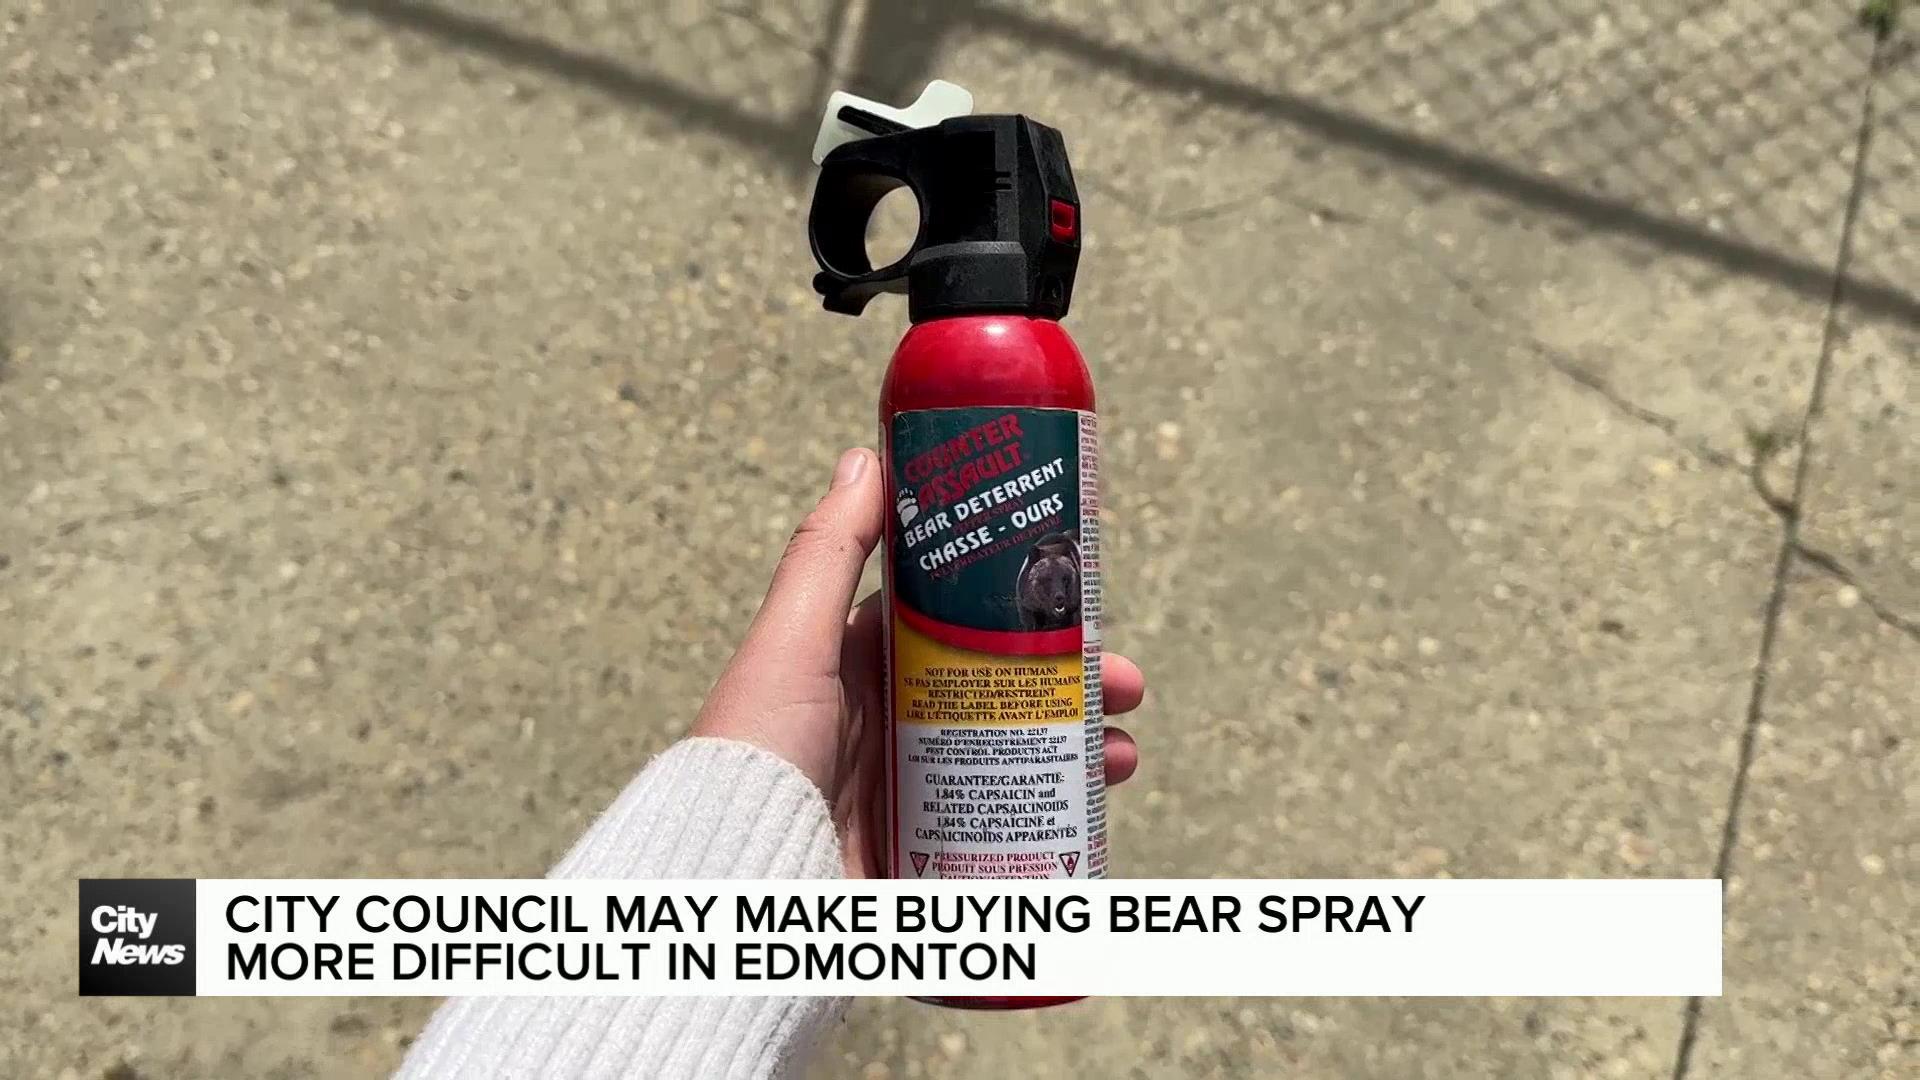 City council may make buying bear spray more difficult in Edmonton